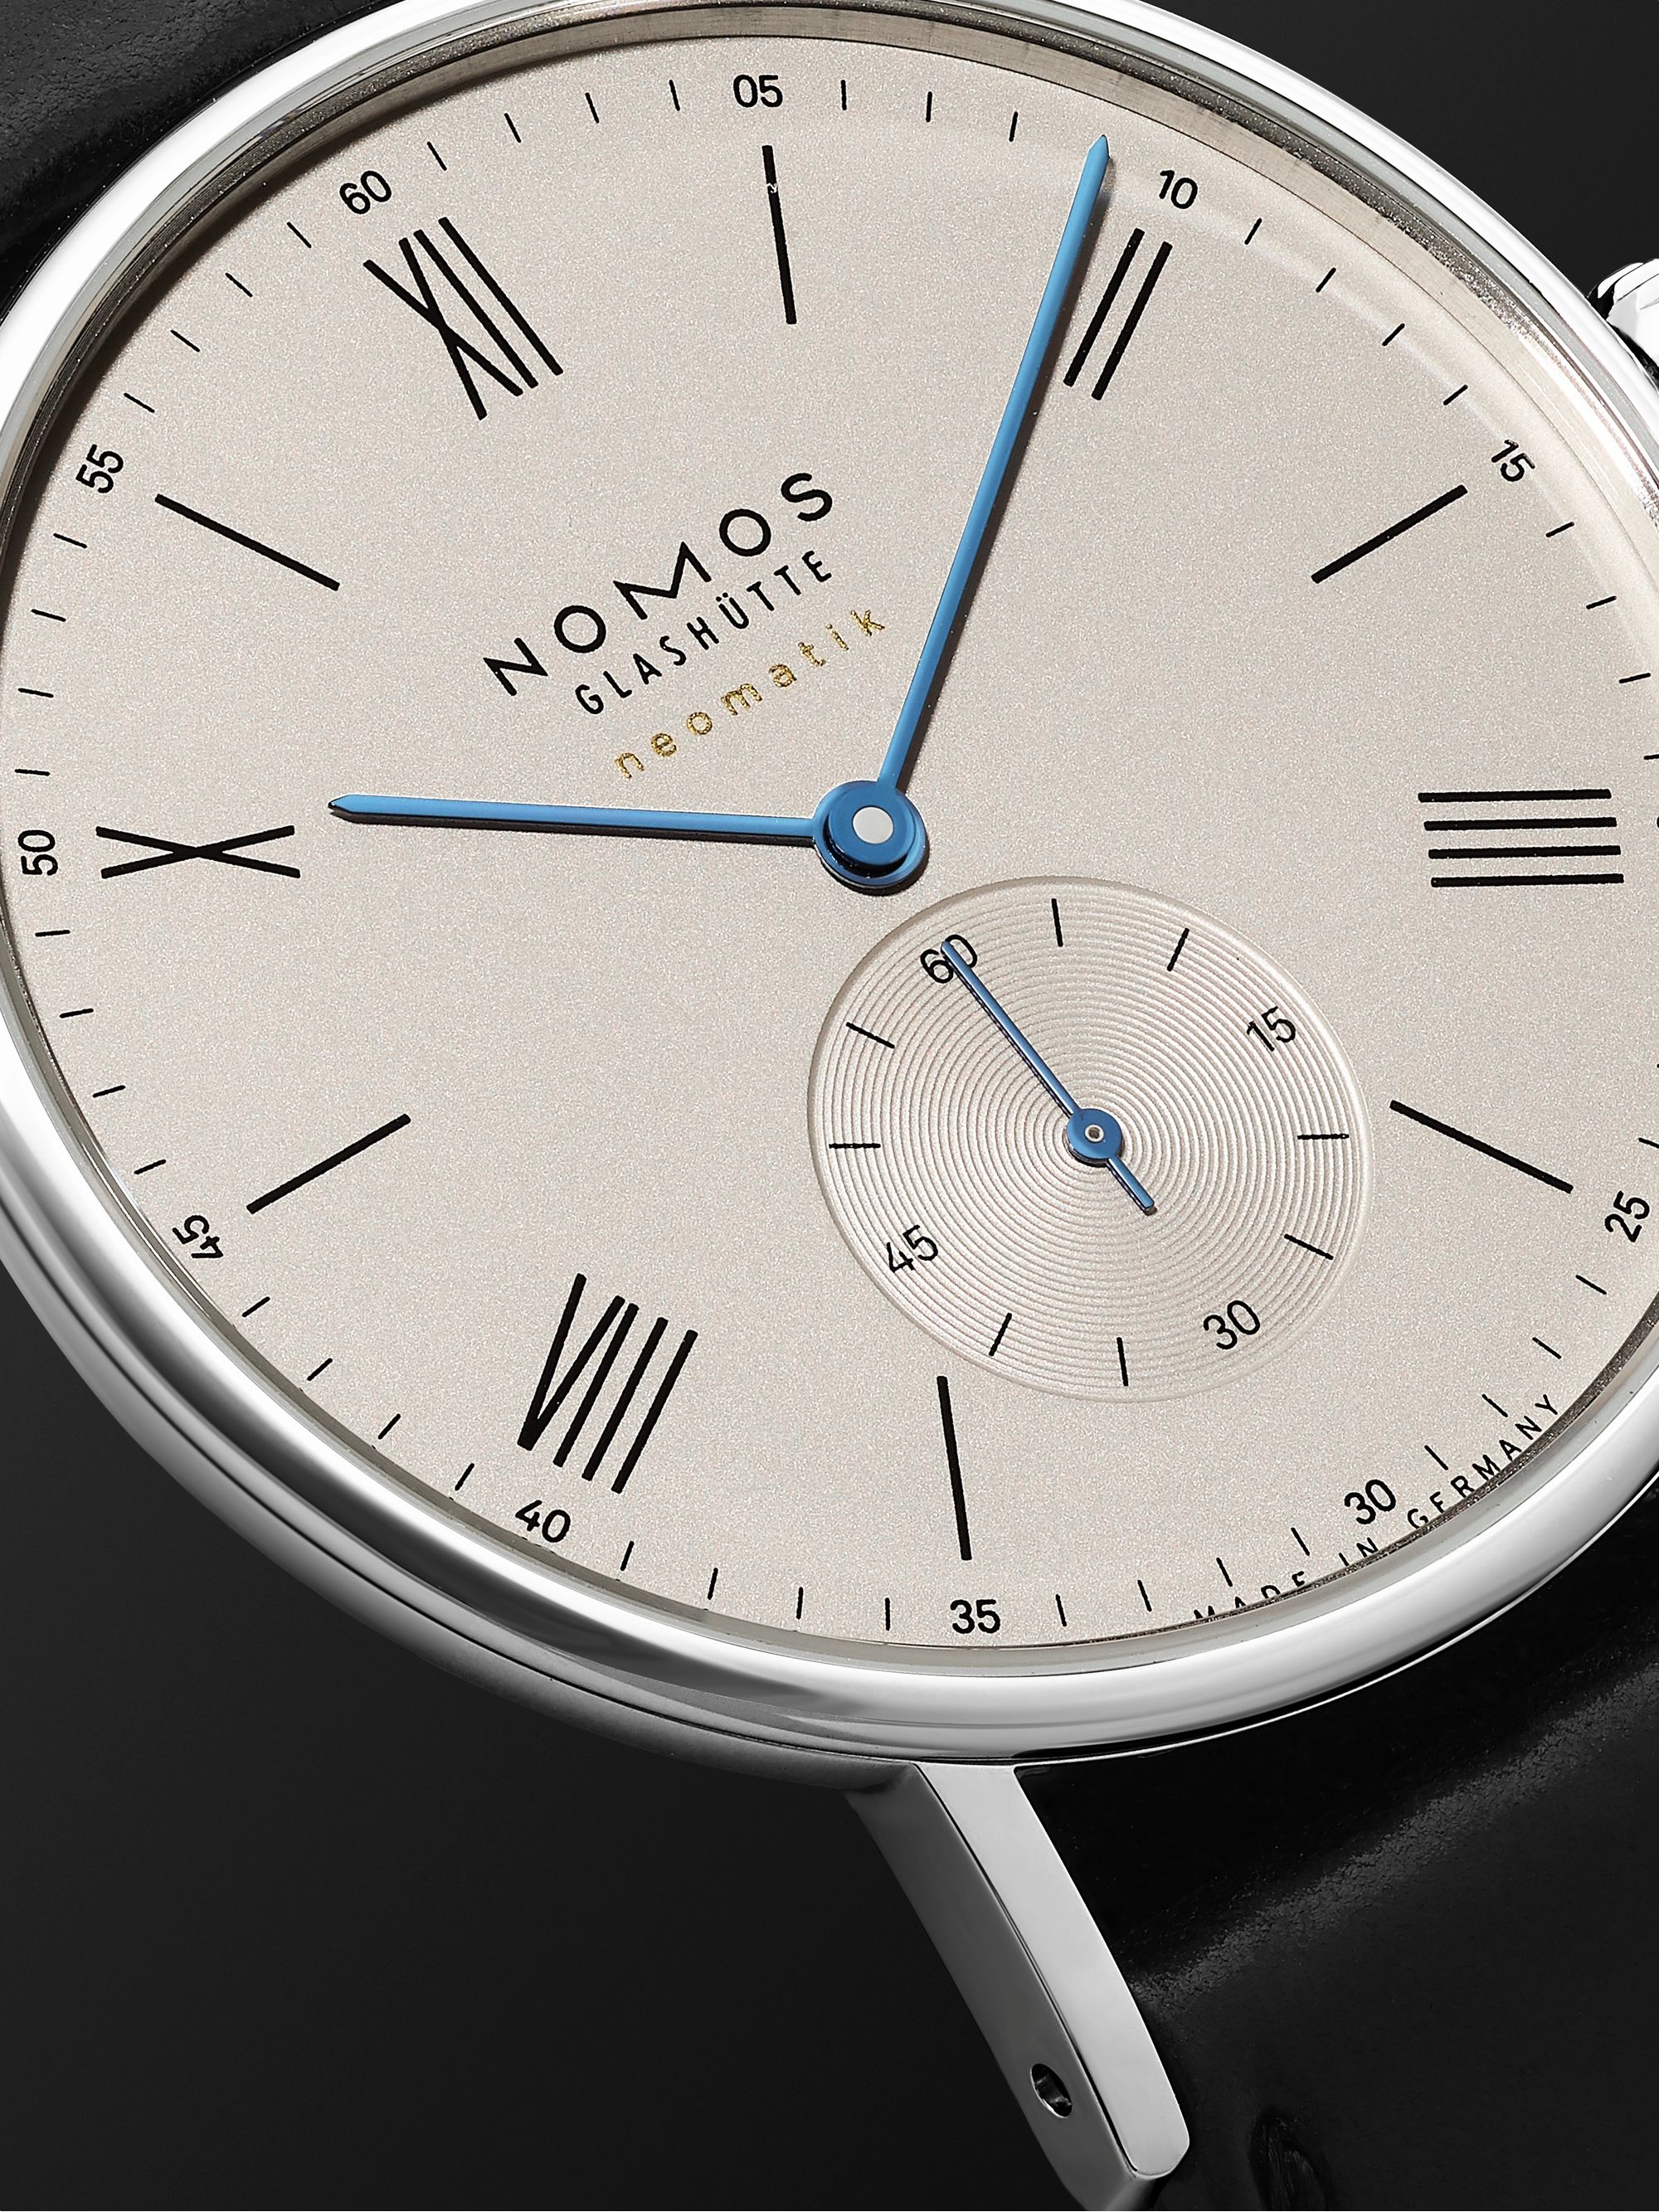 NOMOS GLASHÜTTE Ludwig Neomatik 39 Limited Edition Automatic 38.5mm Stainless Steel and Leather Watch, Ref. No. 250